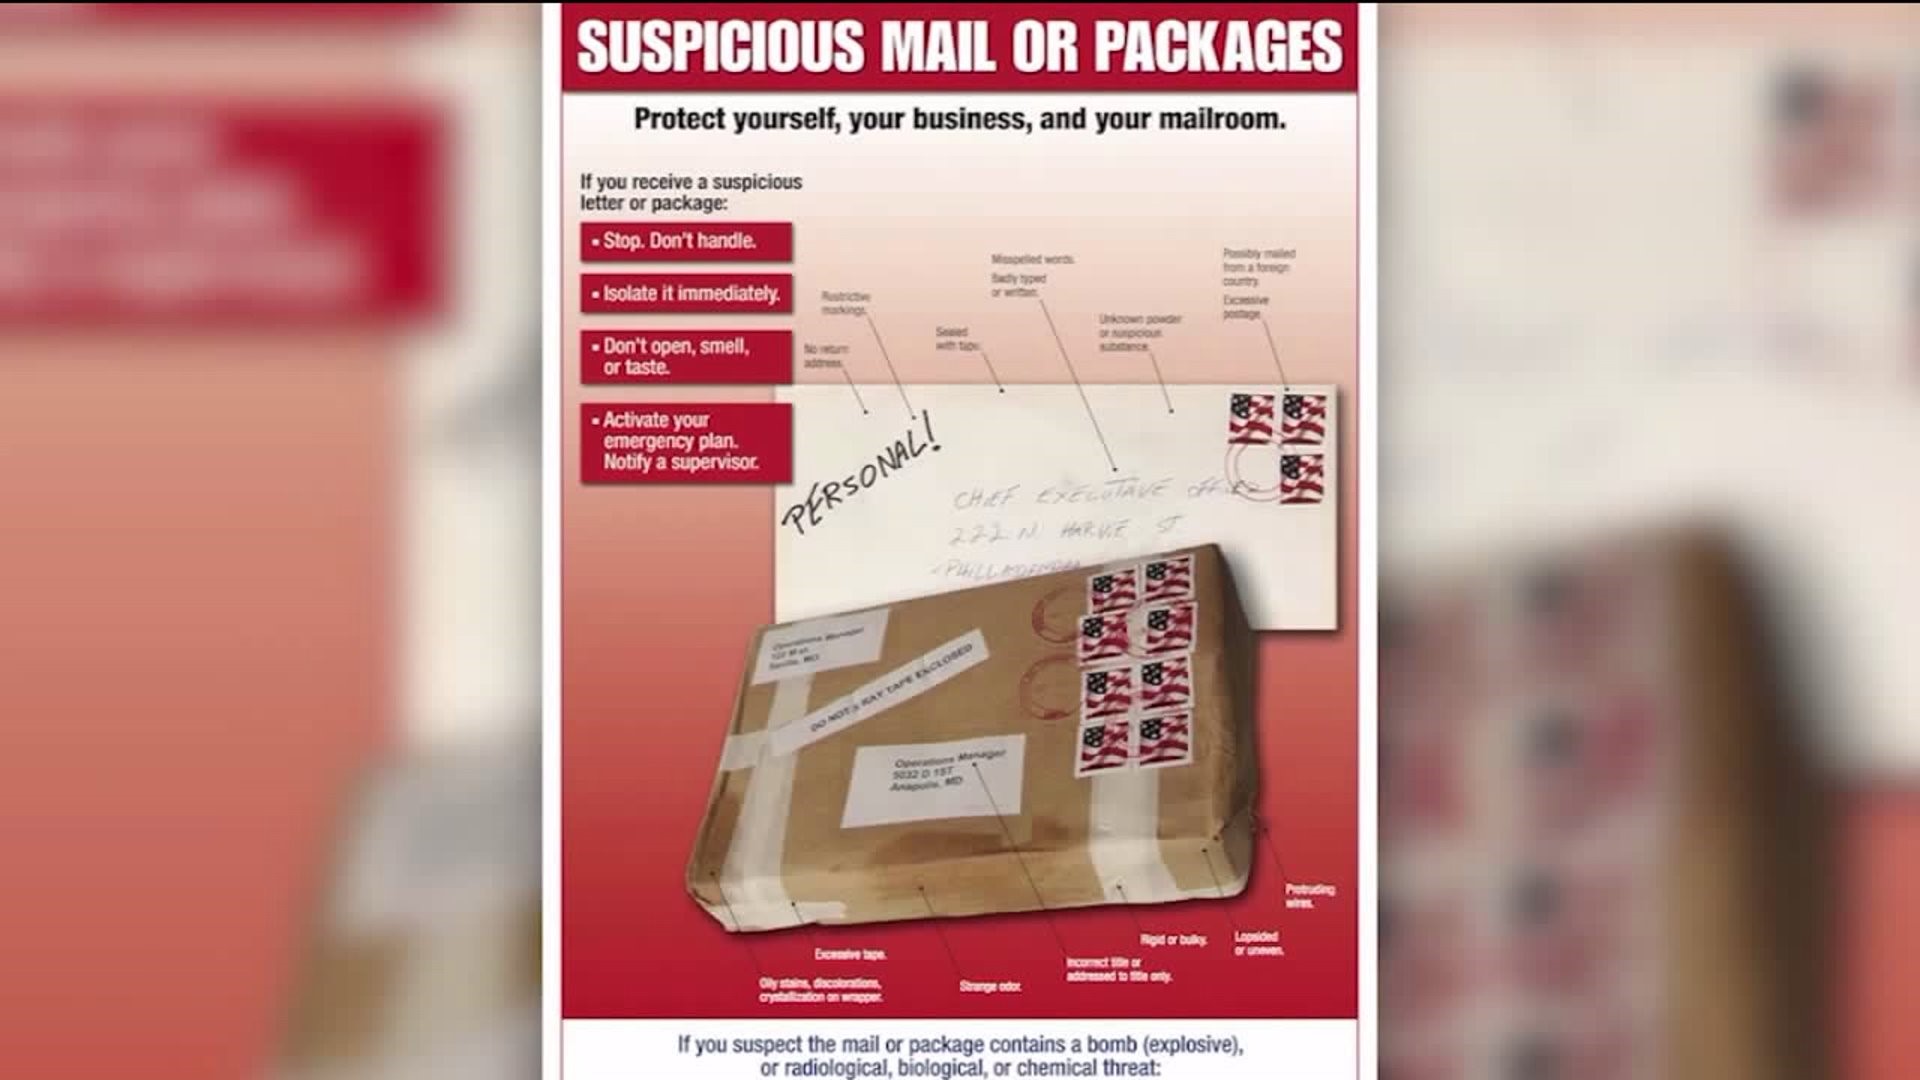 Police Academy, Postal Service Offer Advice on Suspicious Packages